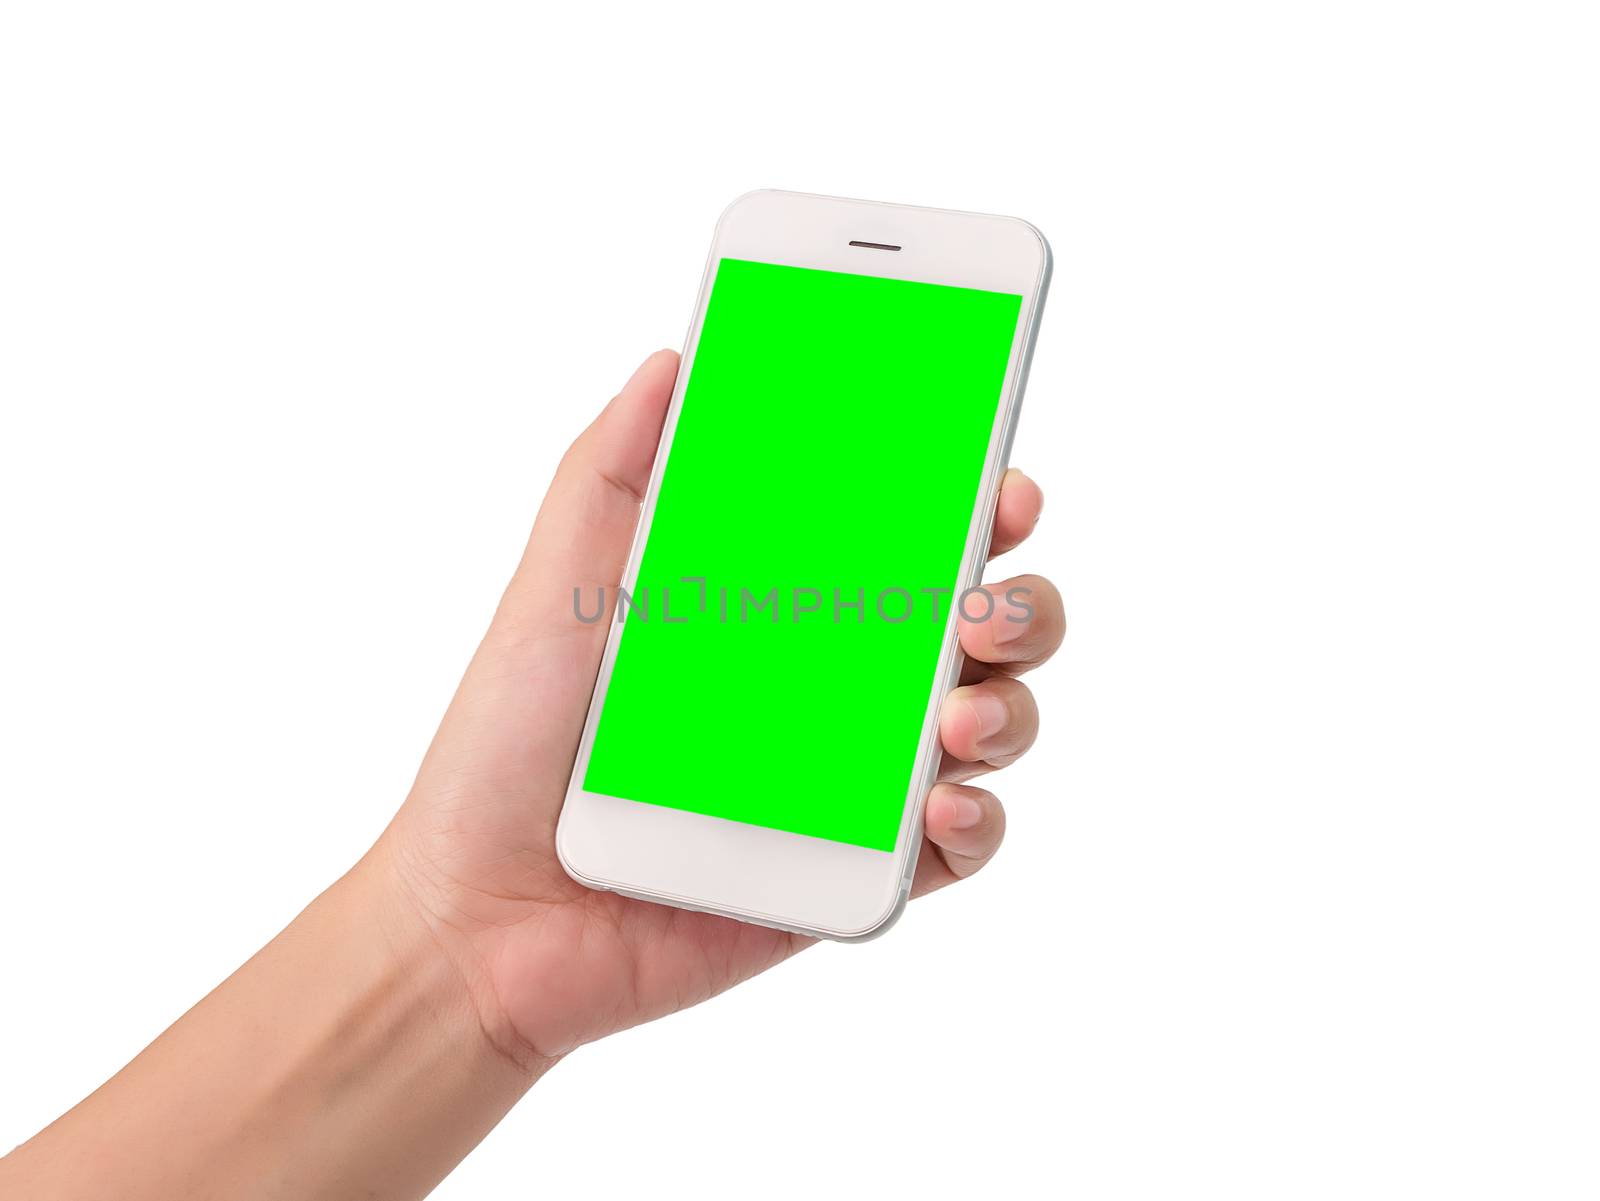 woman hand holding a modern mobile smart phone with blank green screen isolated on white background with clipping path. blank green screen to put your own message